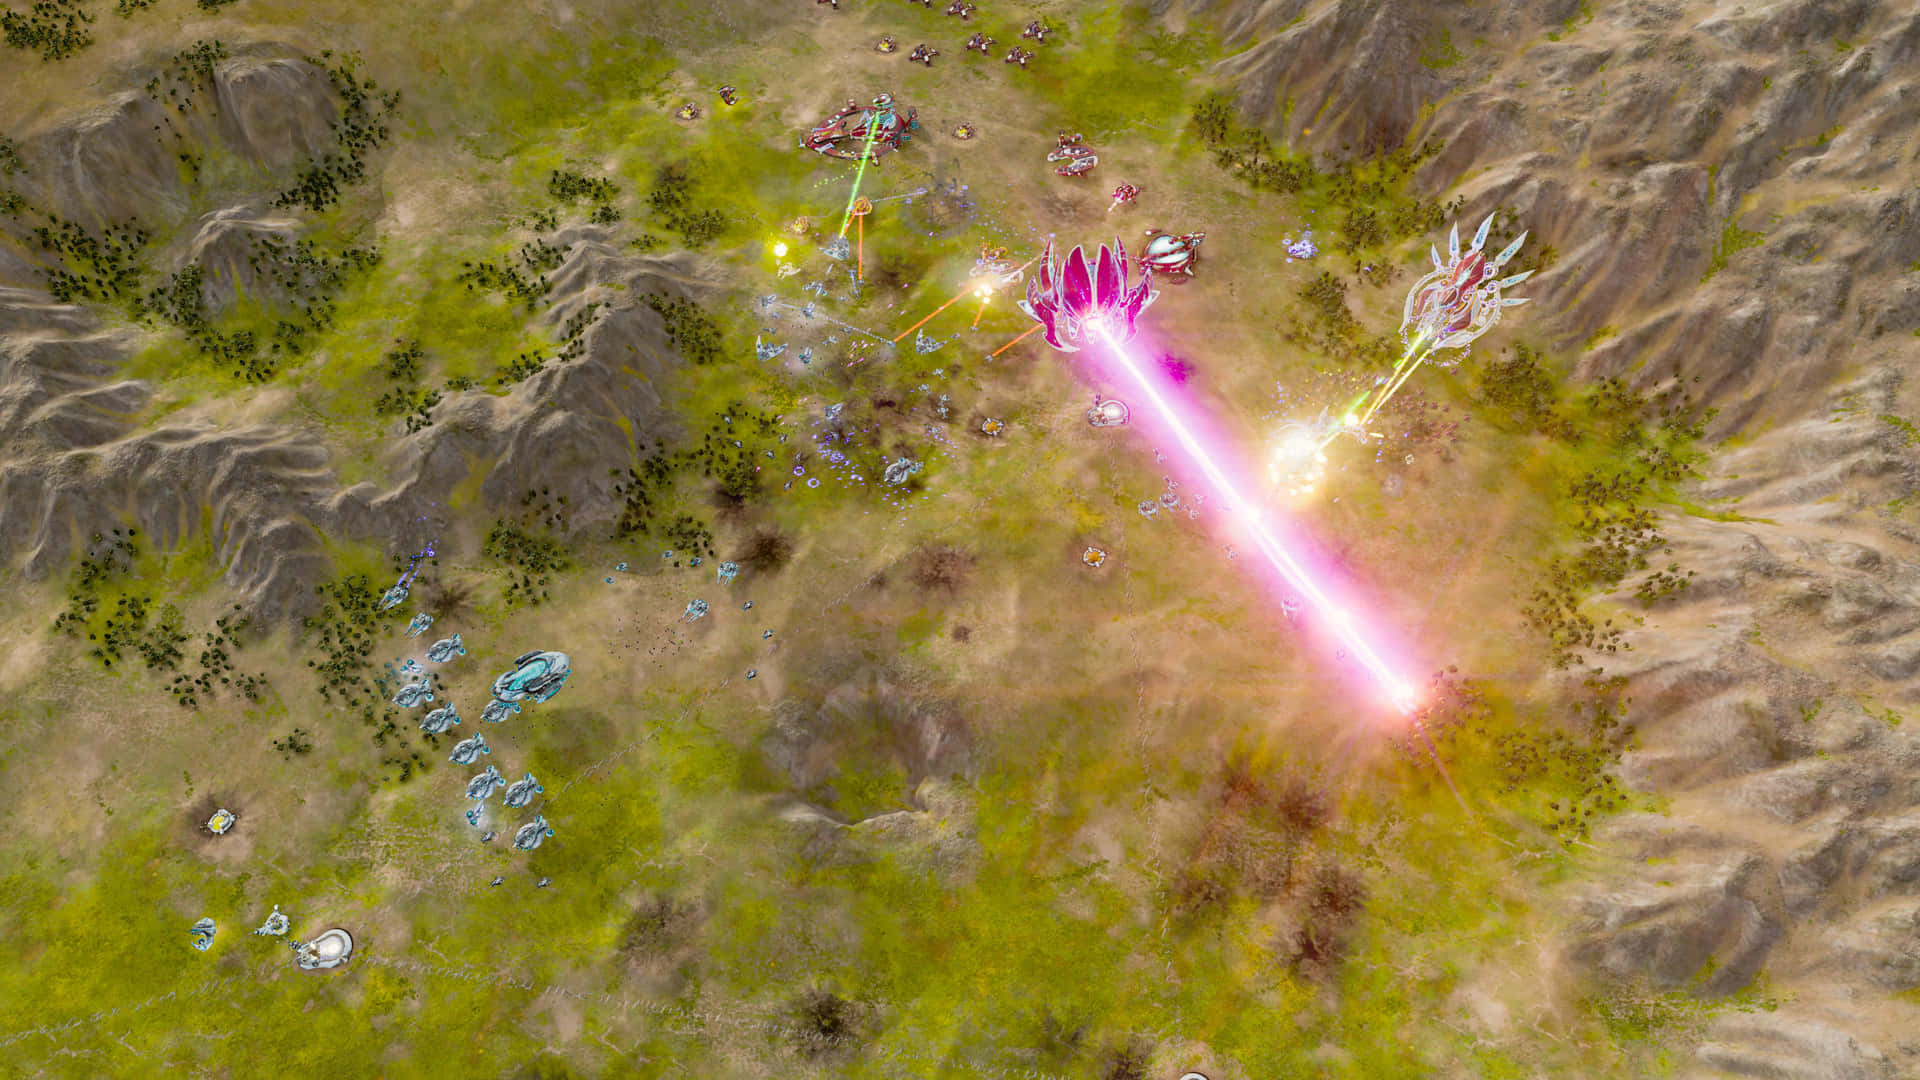 Enter a Massive World of War and Politics in Ashes of the Singularity